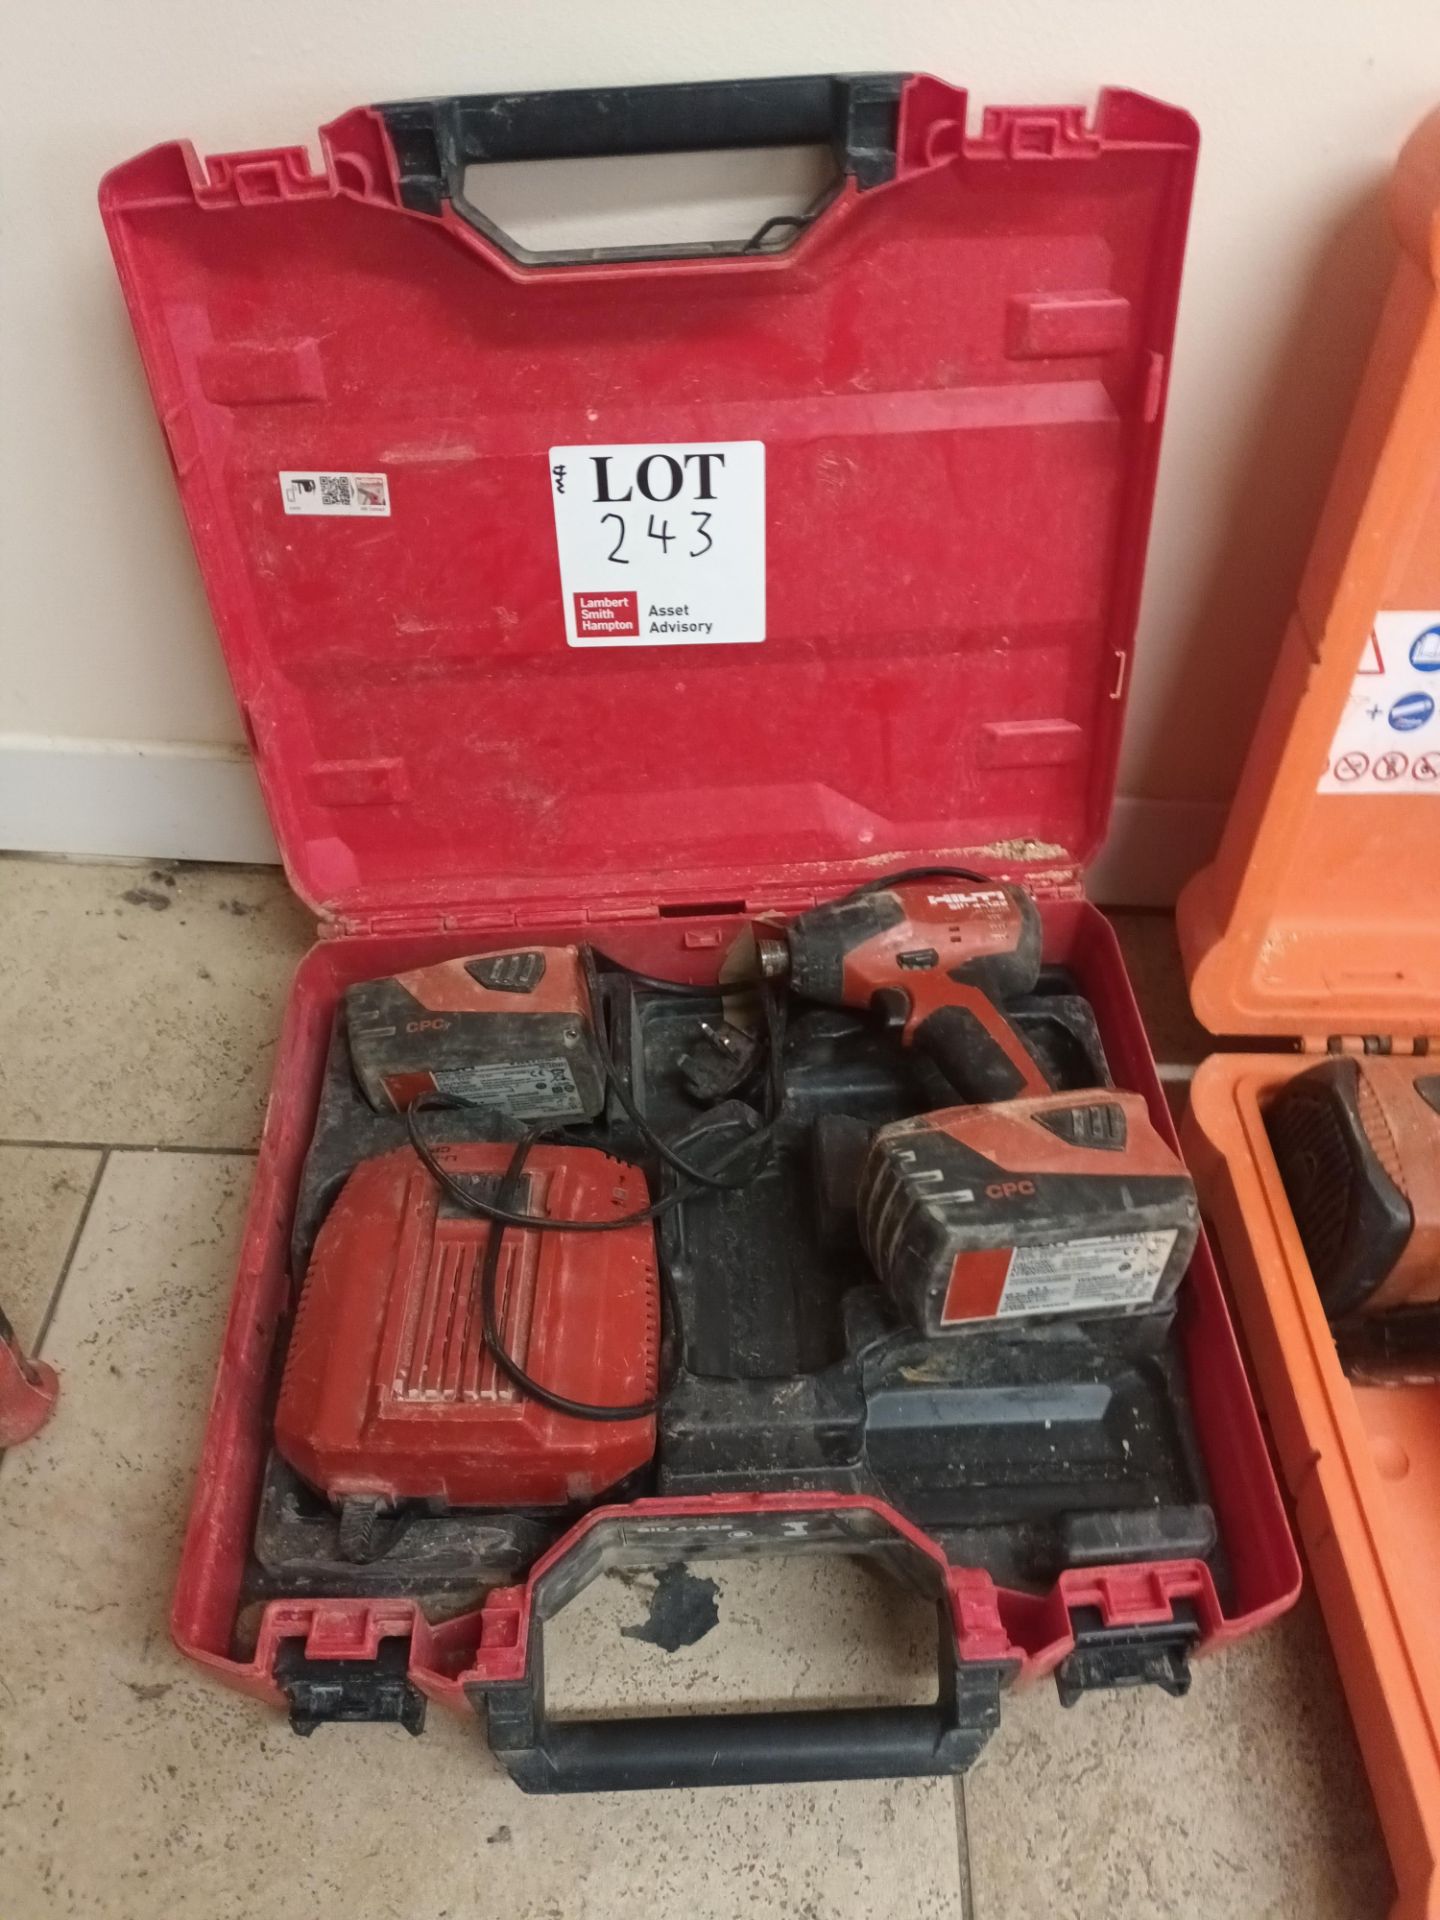 Hilti SID-4-A22 cordless impact driver with battery, charger and carry case